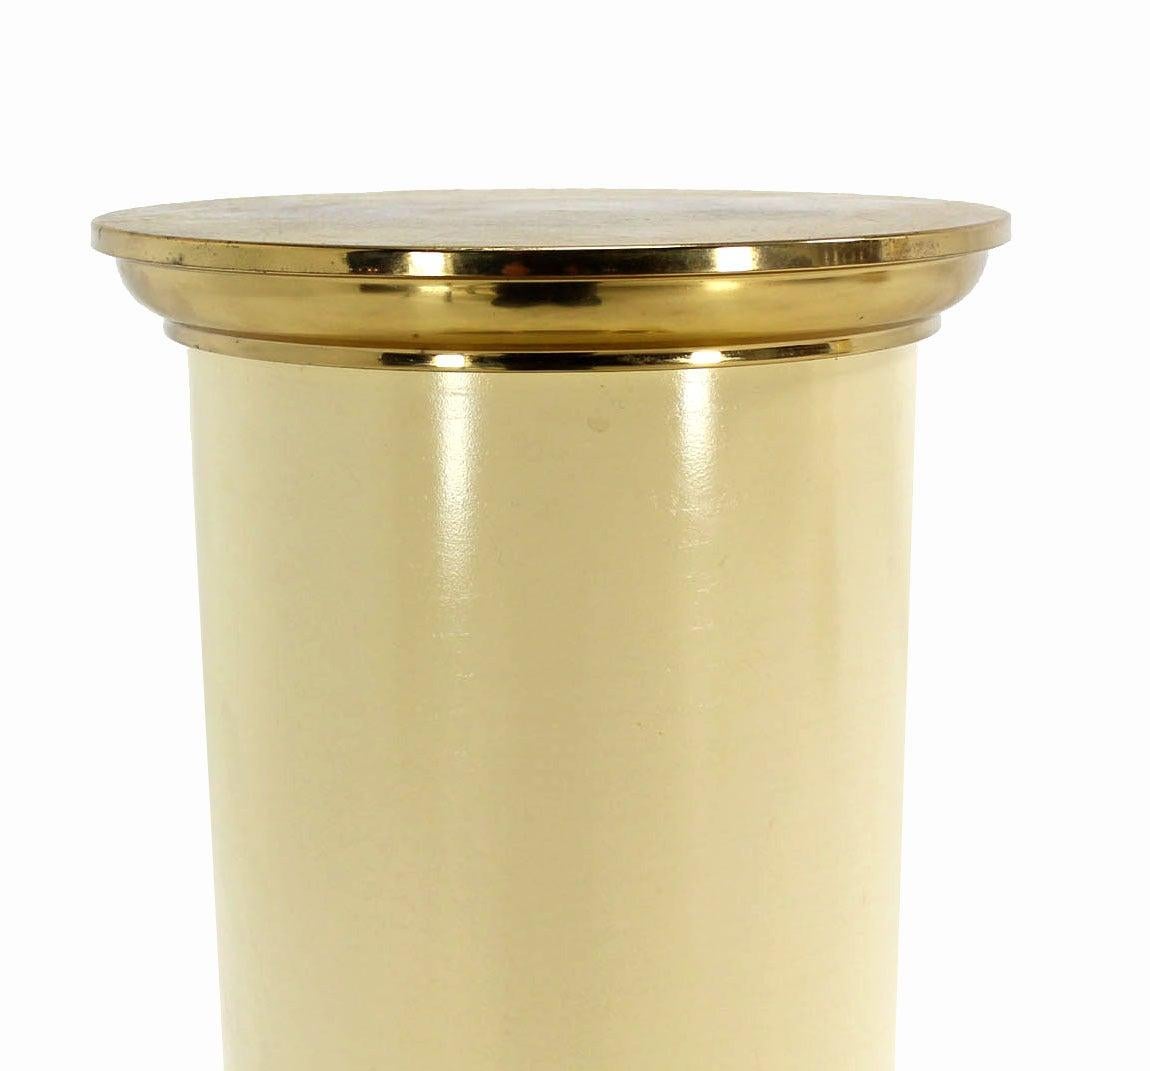 Pair Brass and White Beige Lacquered Wood Round Pedestals Table Bases Stands  In Fair Condition For Sale In Rockaway, NJ